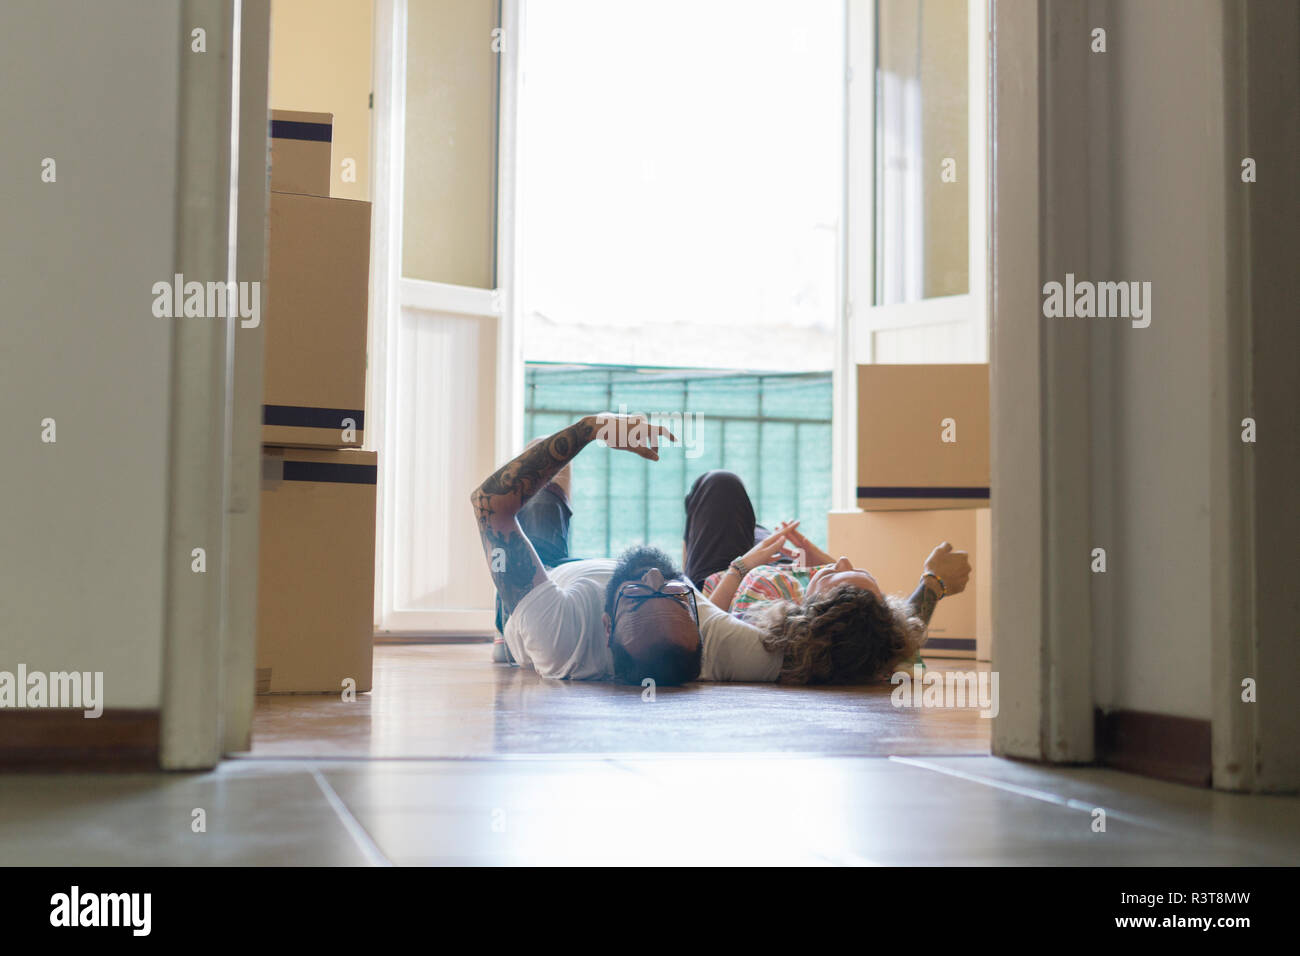 Couple lying side by side on the floor of new home in front of open balcony door Stock Photo